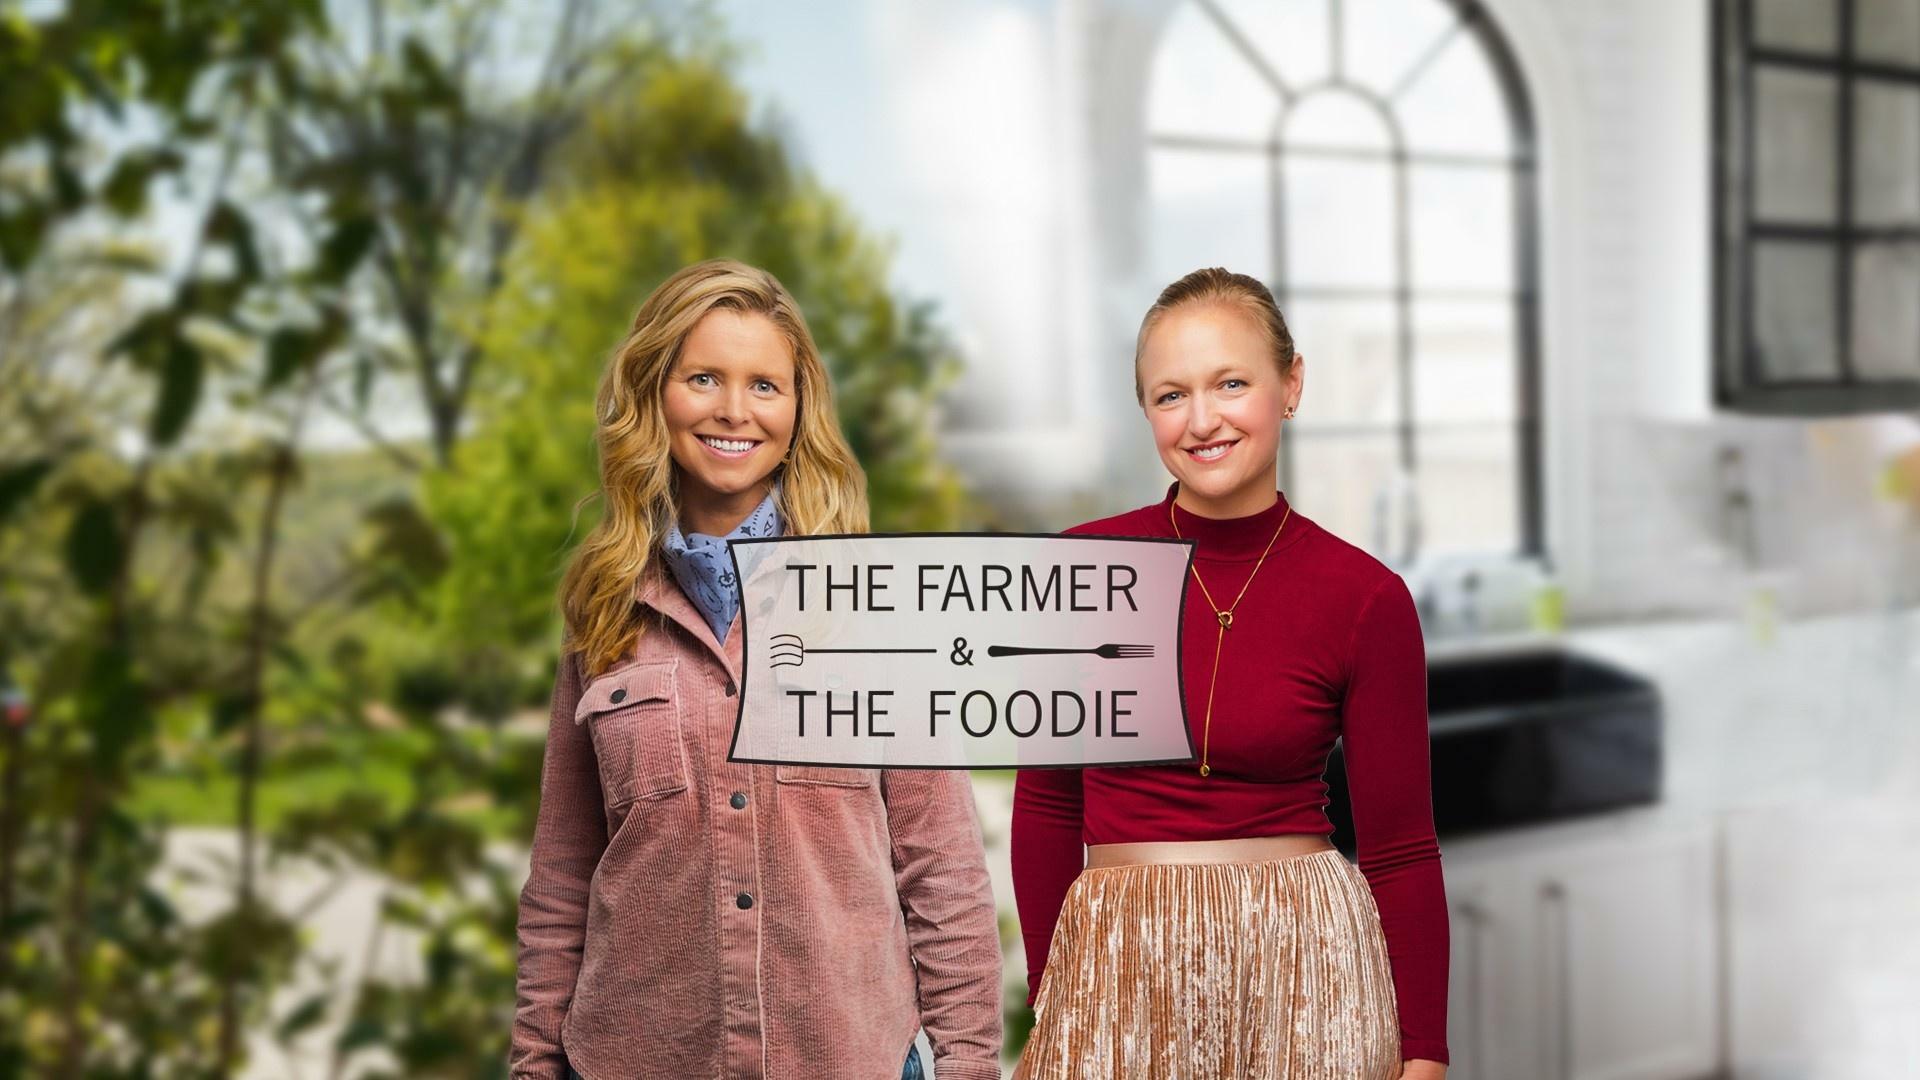 The Farmer and The Foodie